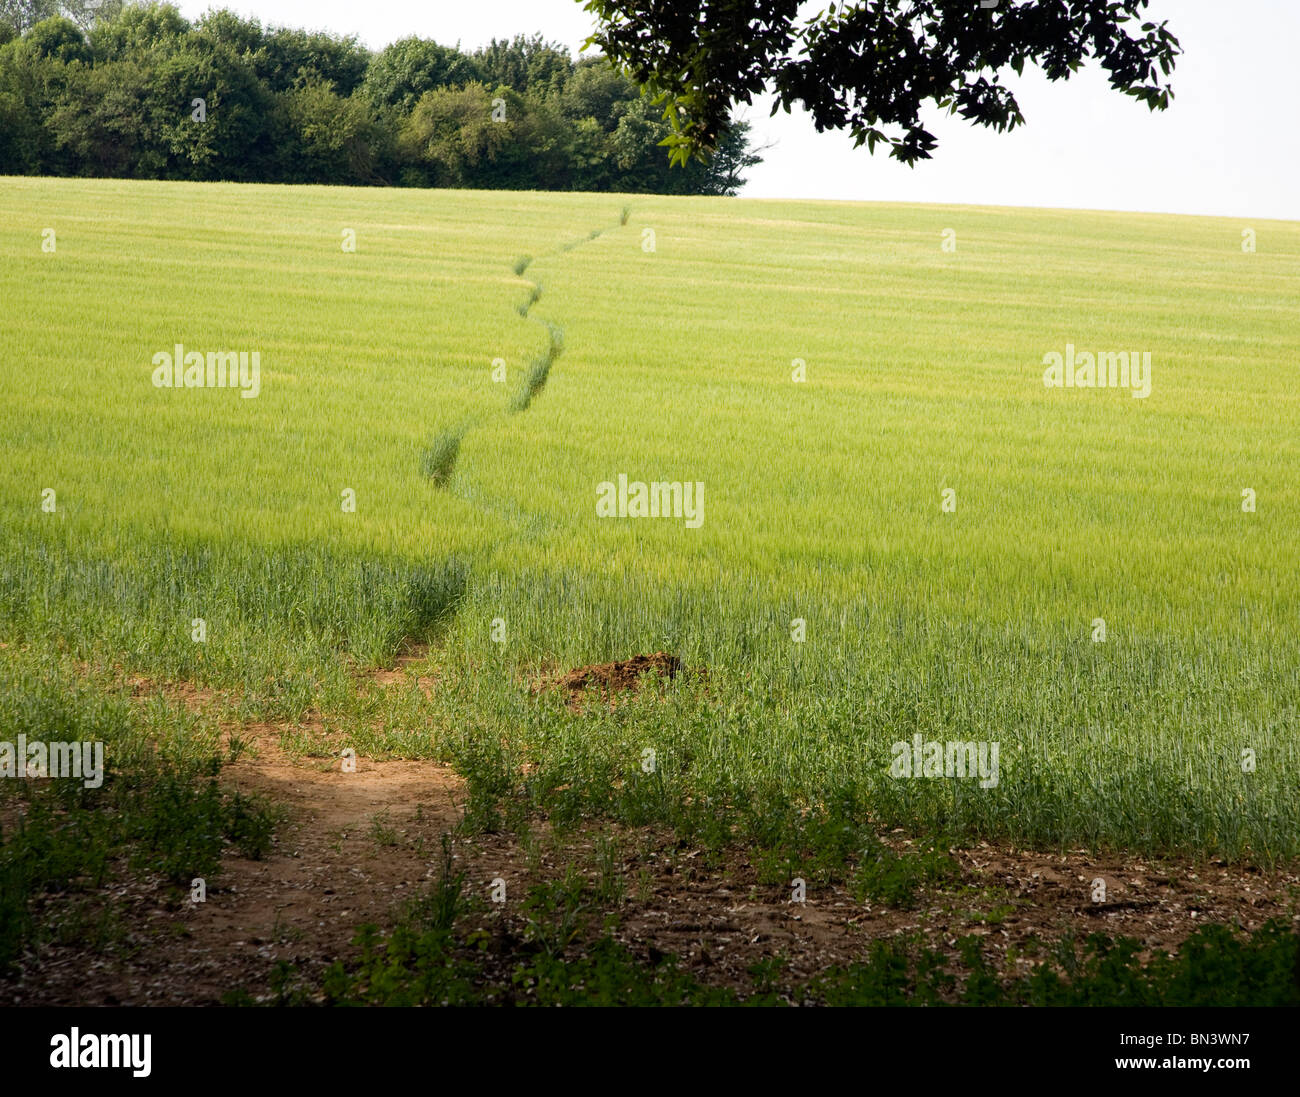 Footpath climbing hill crossing field cereal crop Stock Photo